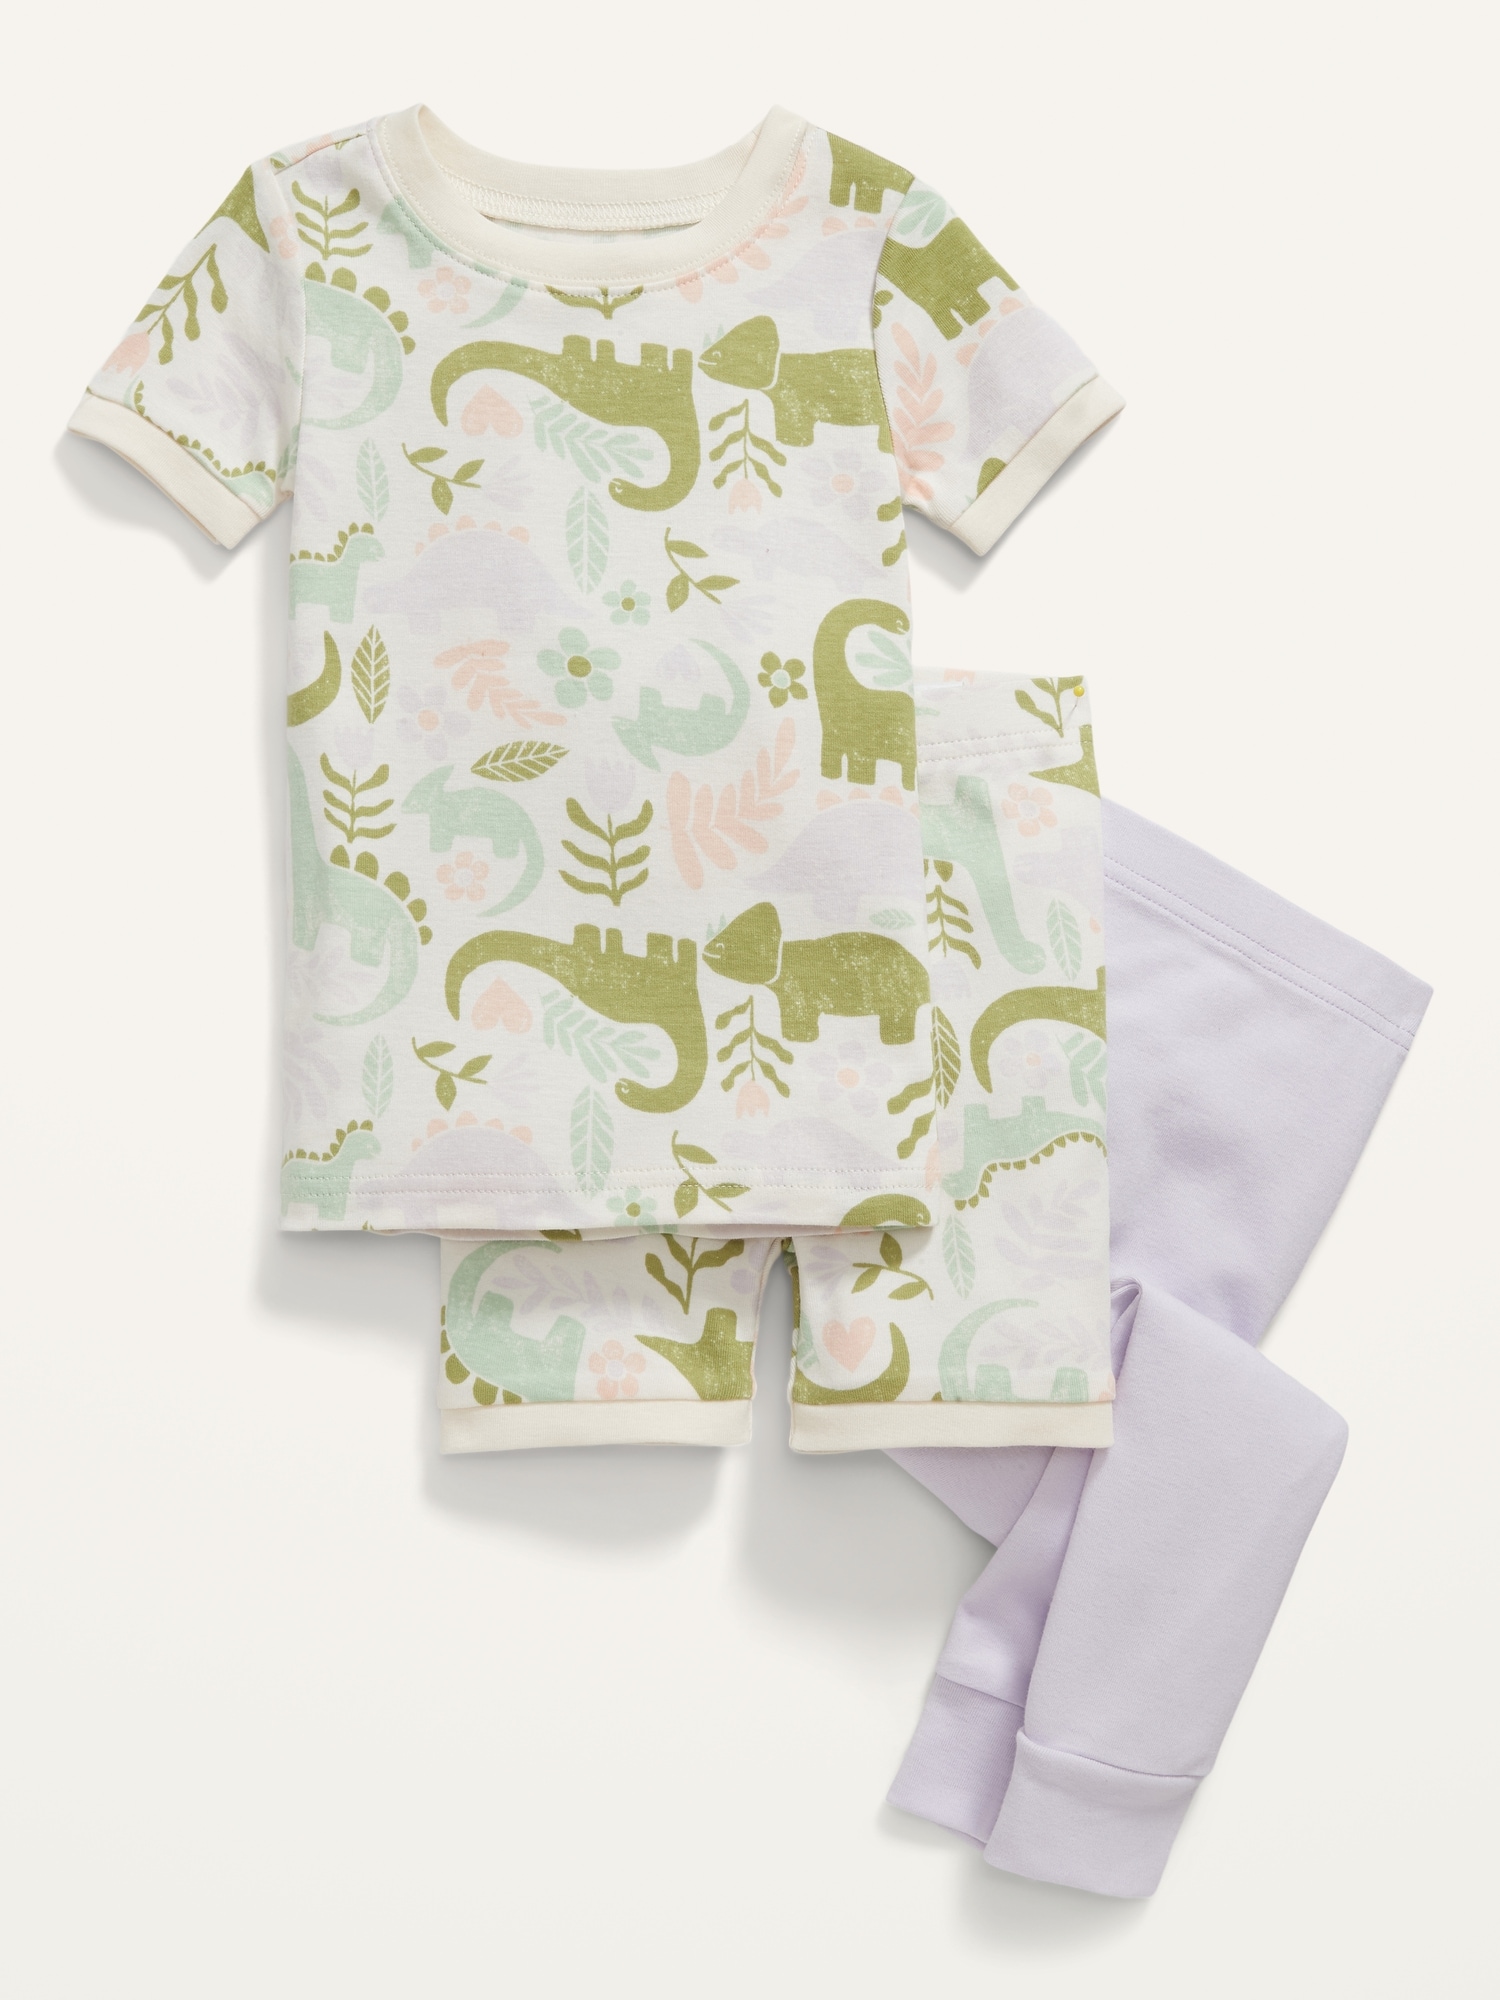 Unisex 3-Piece Pajama Set for Toddler & Baby | Old Navy